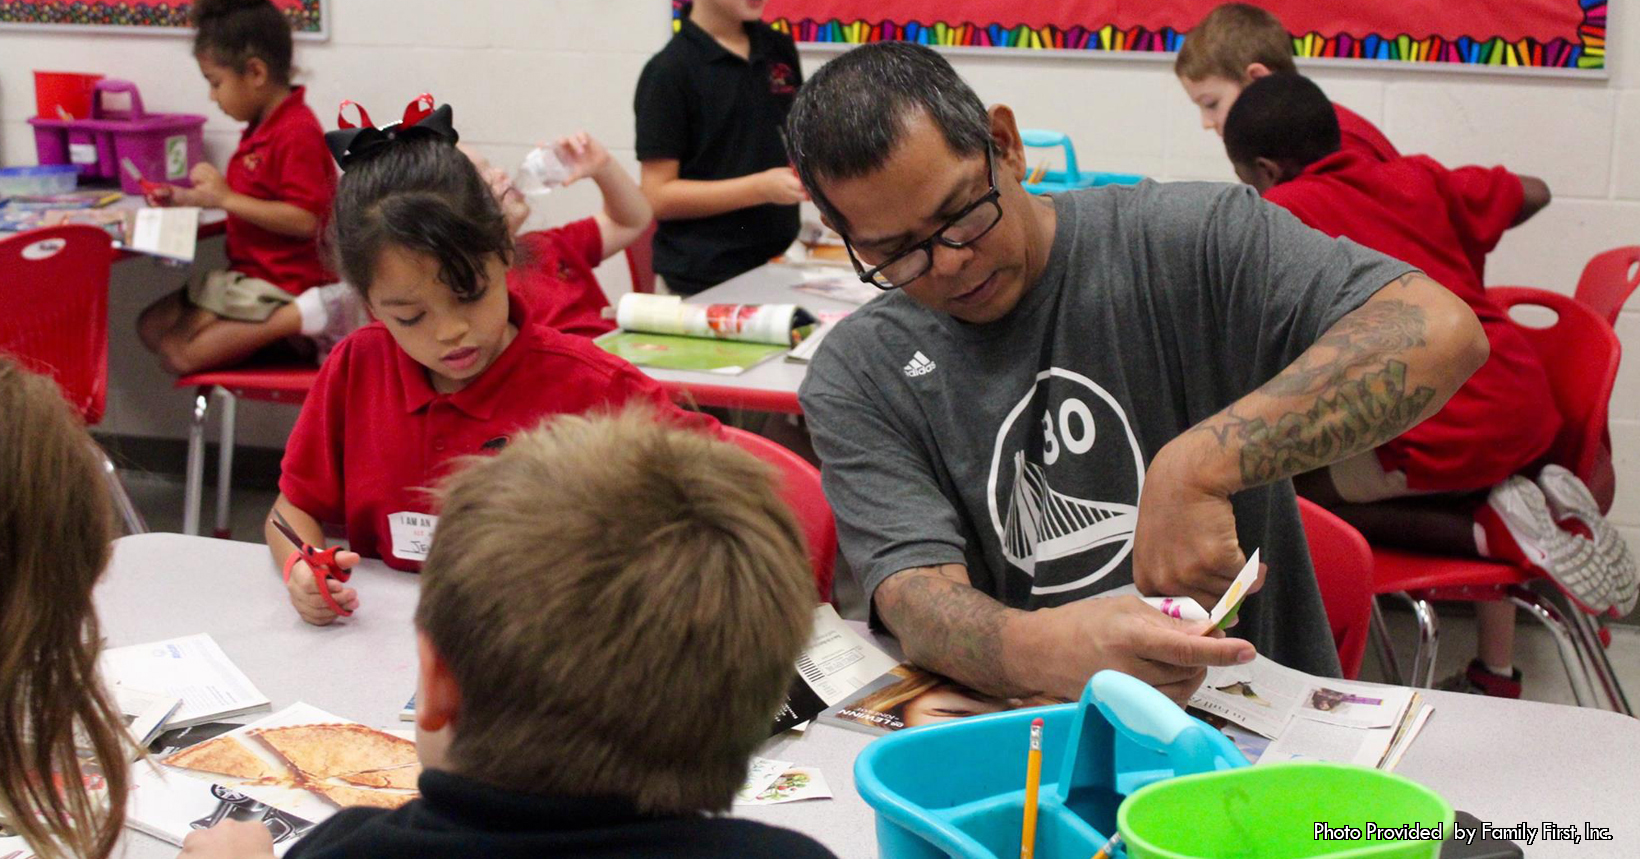 A man in a grey shirt and his daughter sit in her elementary school classroom and work on a crafting project.